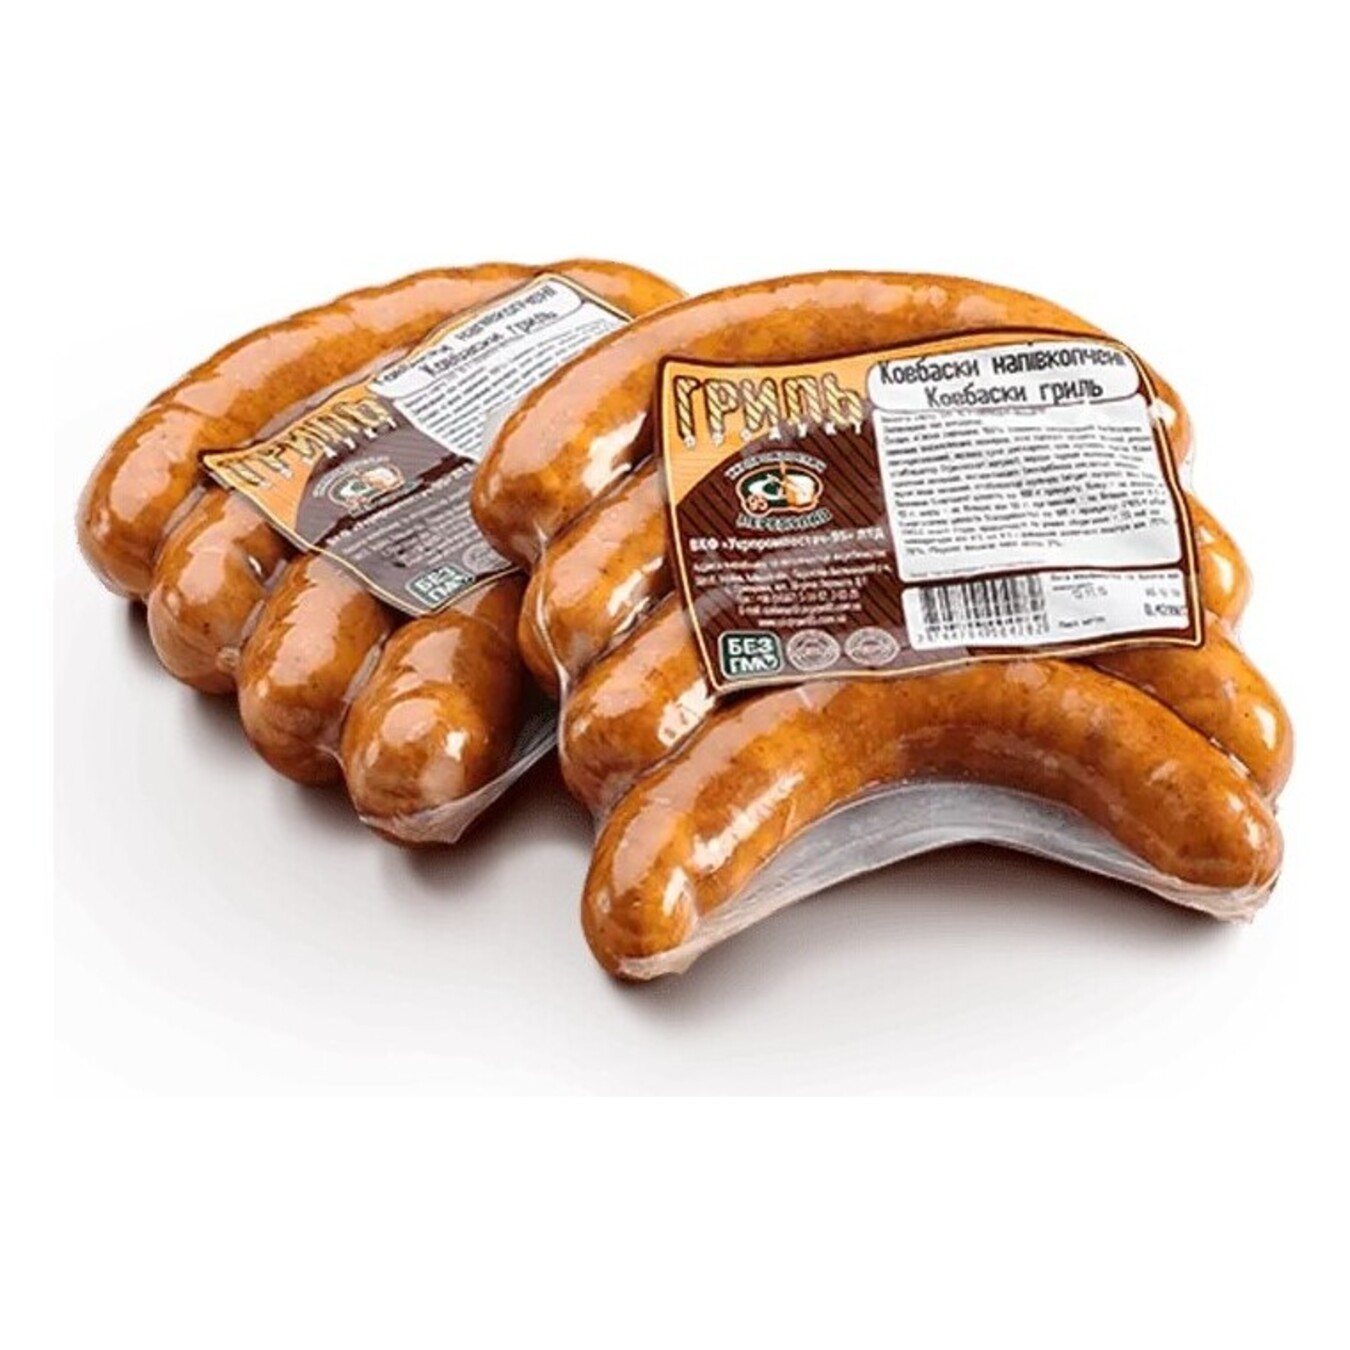 Ukrprompostach-95 smoked-baked grilled sausages 500-550 grams per package 2